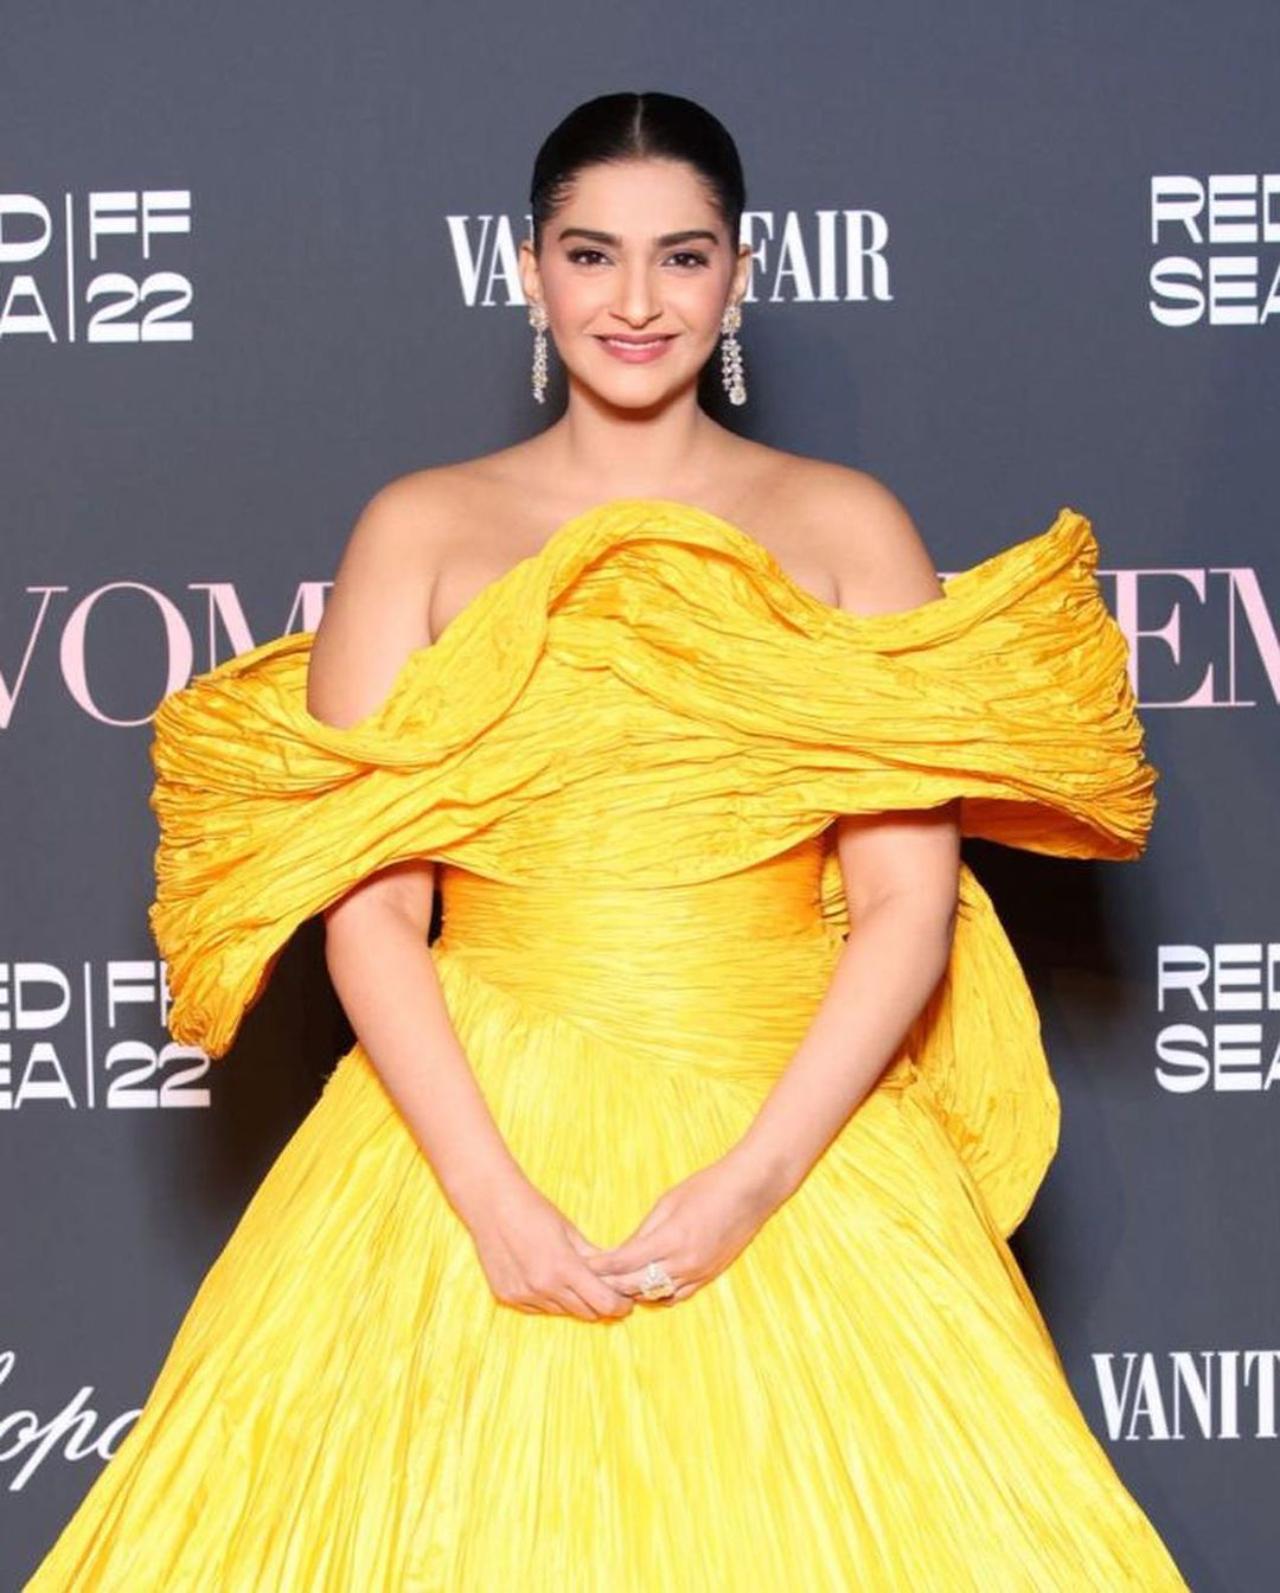 Sonam Kapoor looked stunning in a bright yellow off-shoulder gown. The actress attended the Women in Cinema gala dinner hosted by the festival